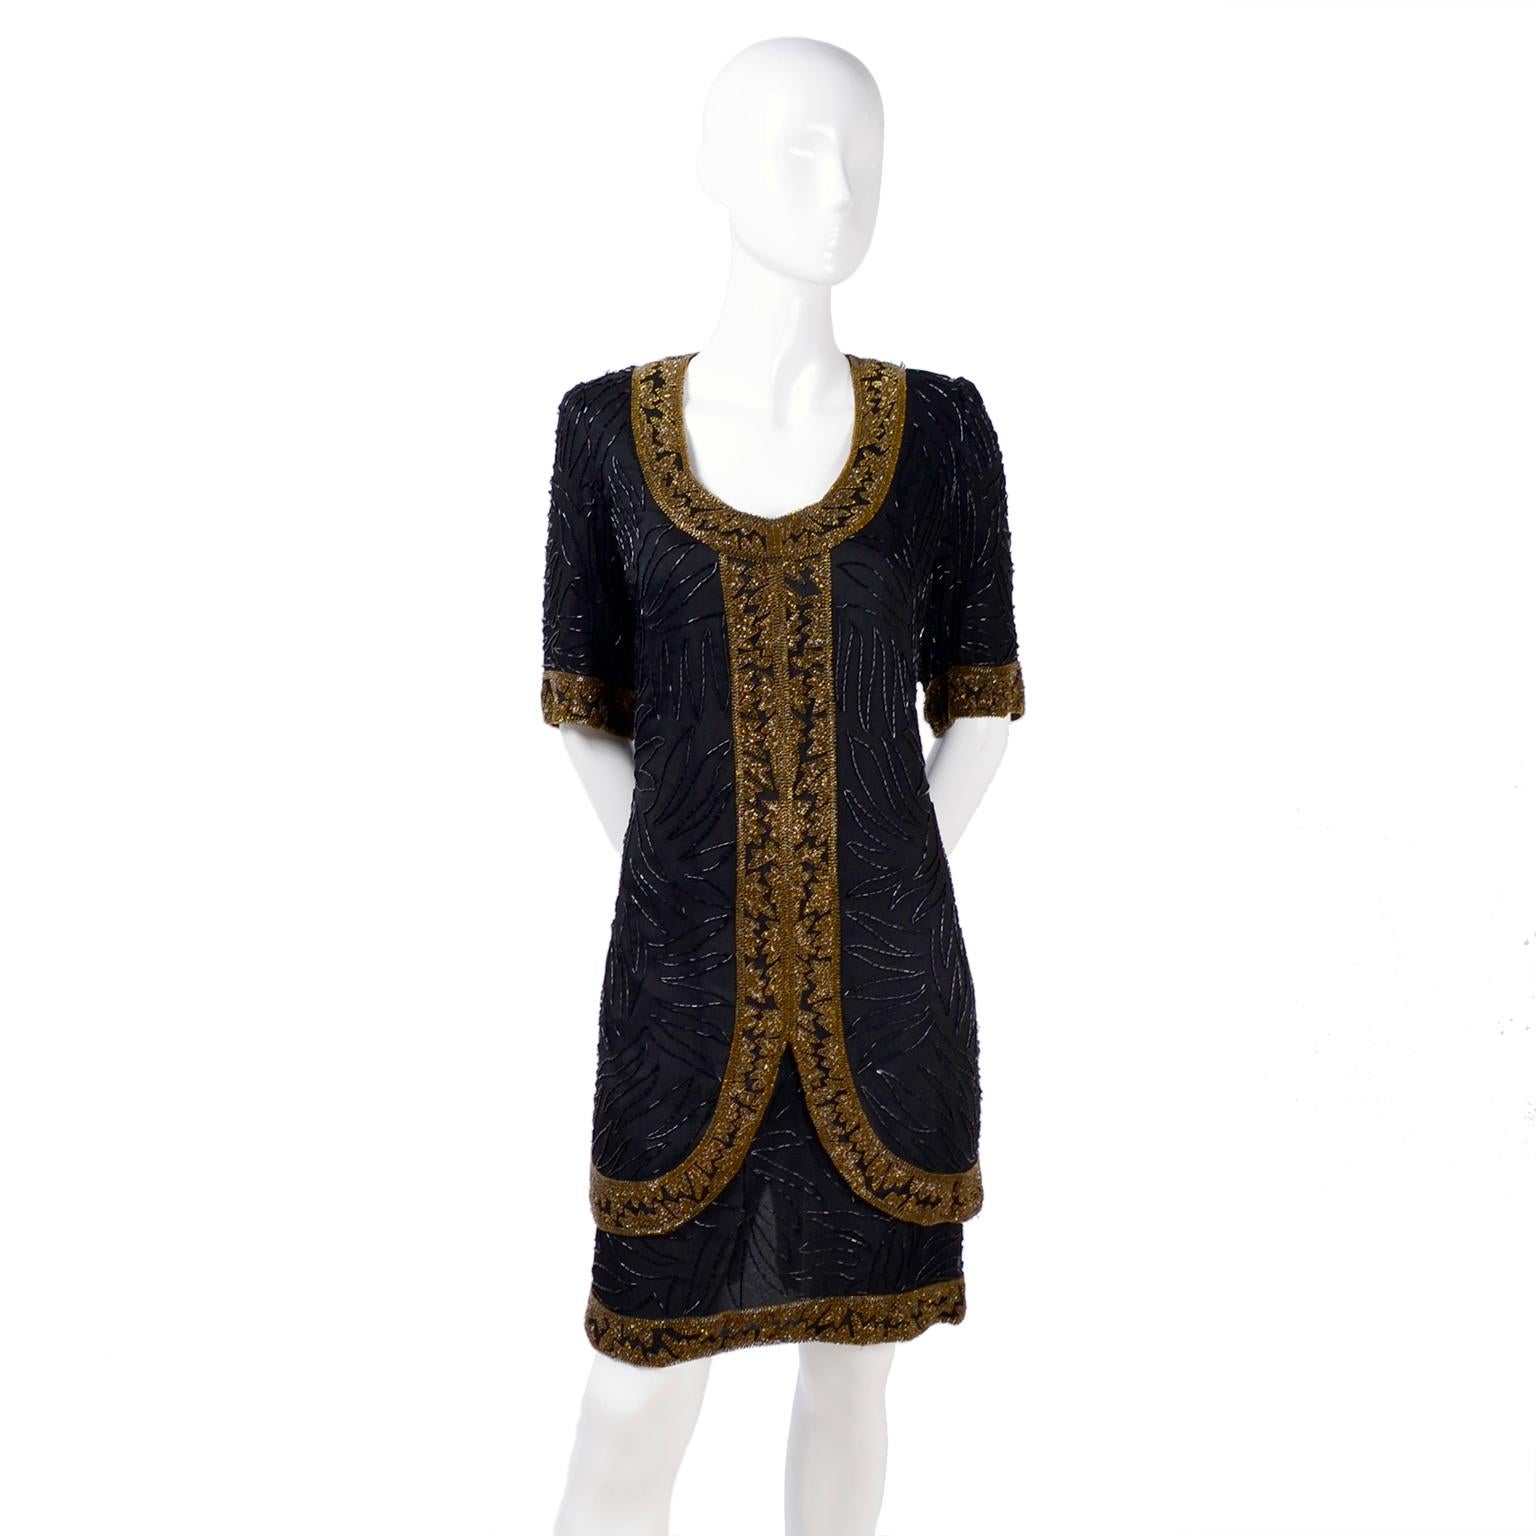 This is a 1980's silk vintage dress with bugle beads of black making leaf-like designs and trim of gold bronze smaller beads. The label reads; Brilliante by J.A. The hem is iered with a layer that looks like a top and skirt, but all one piece. There